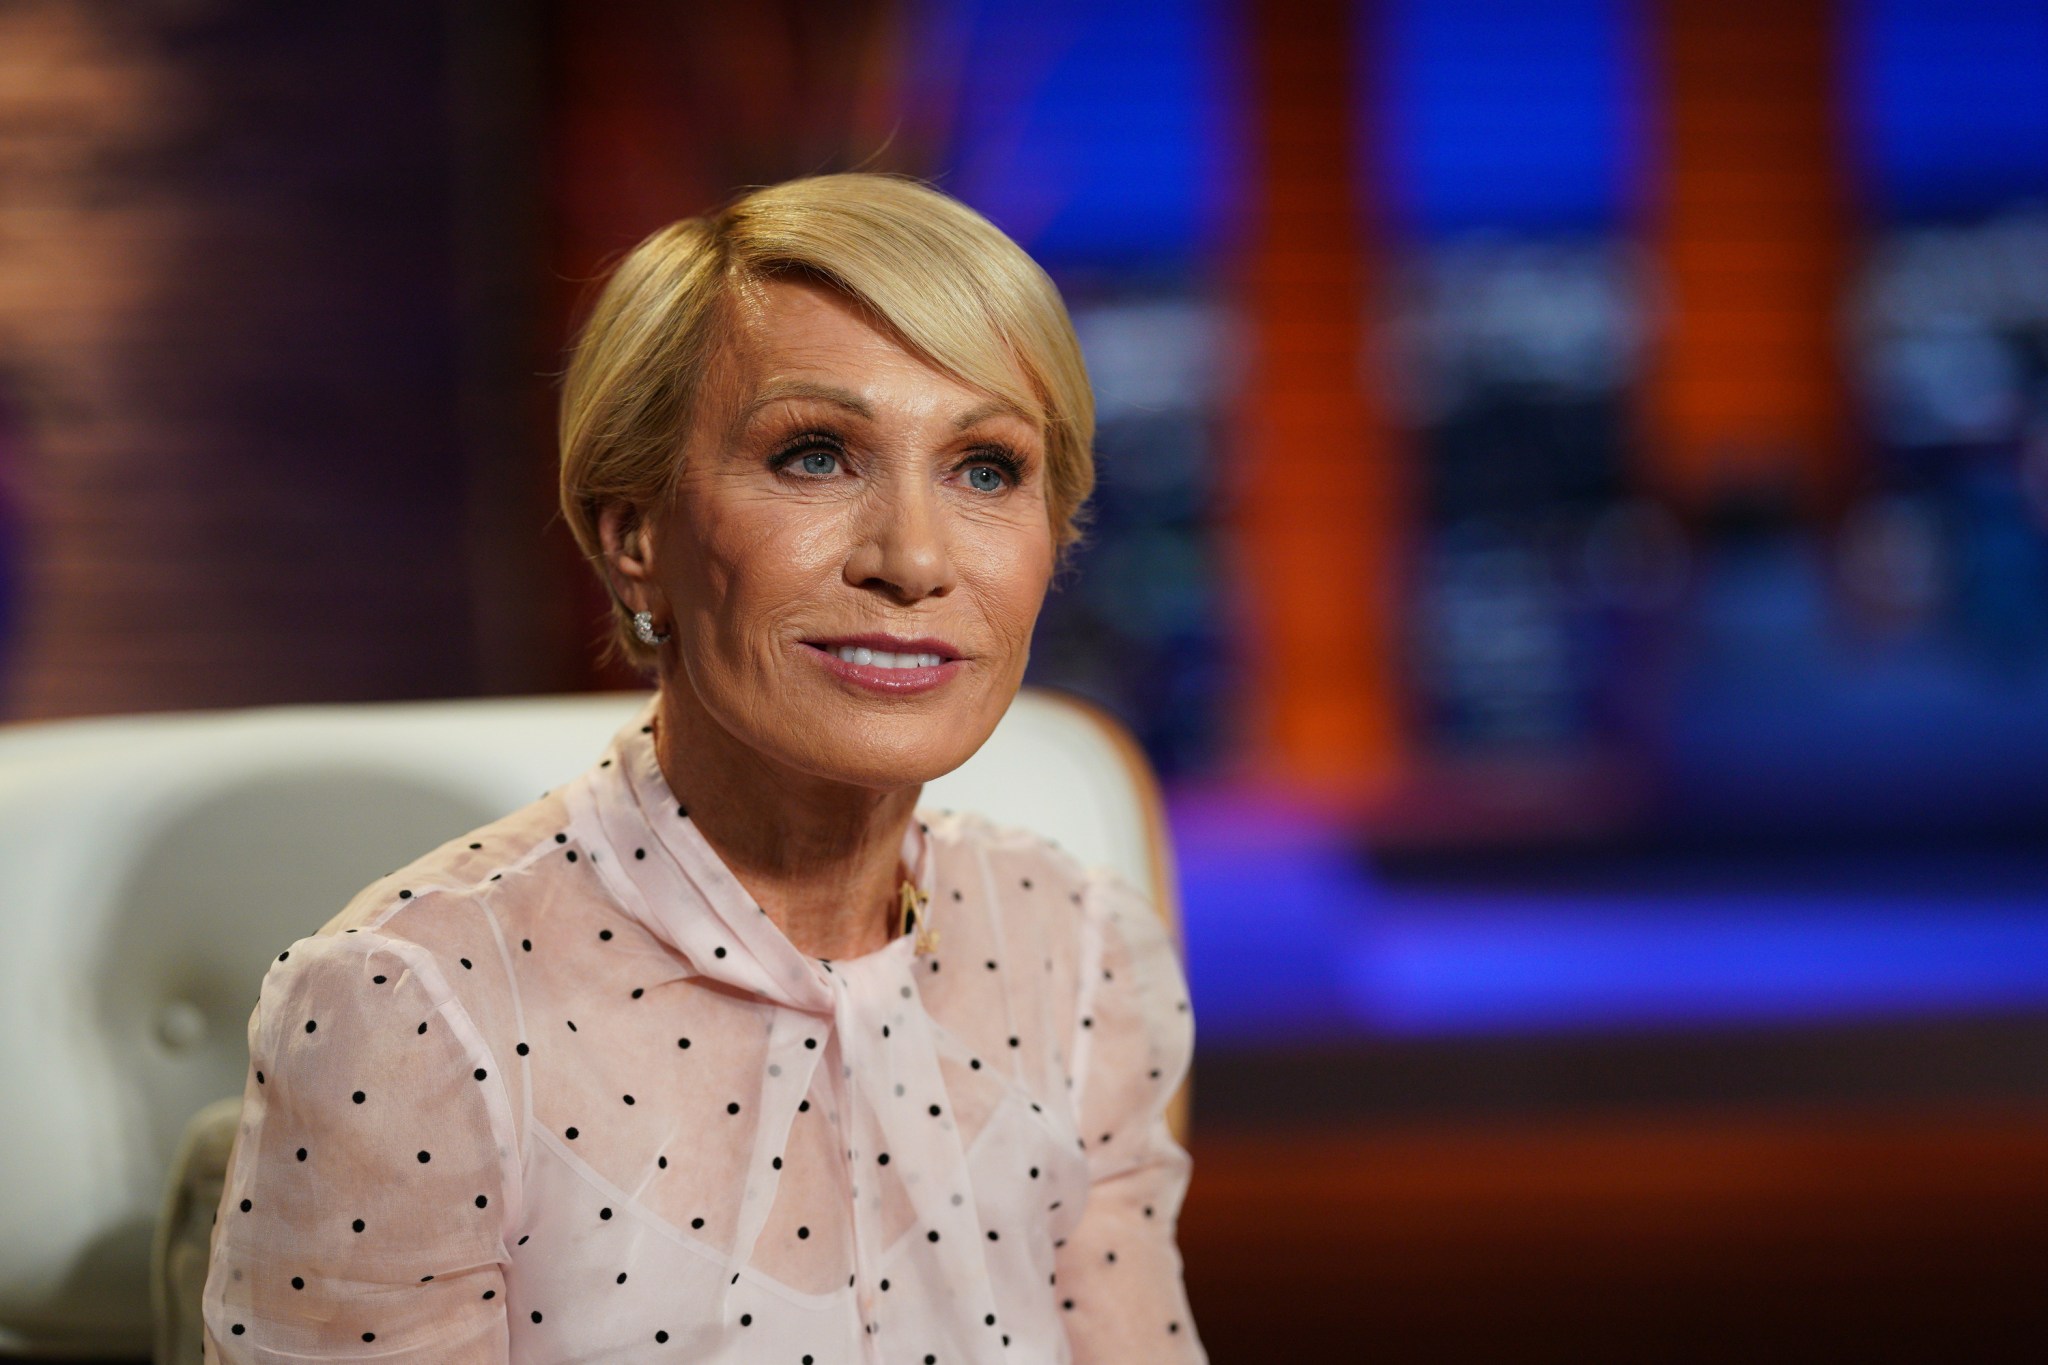 Self-made real estate millionaire Barbara Corcoran says home prices could go up 10% if mortgage rates dip